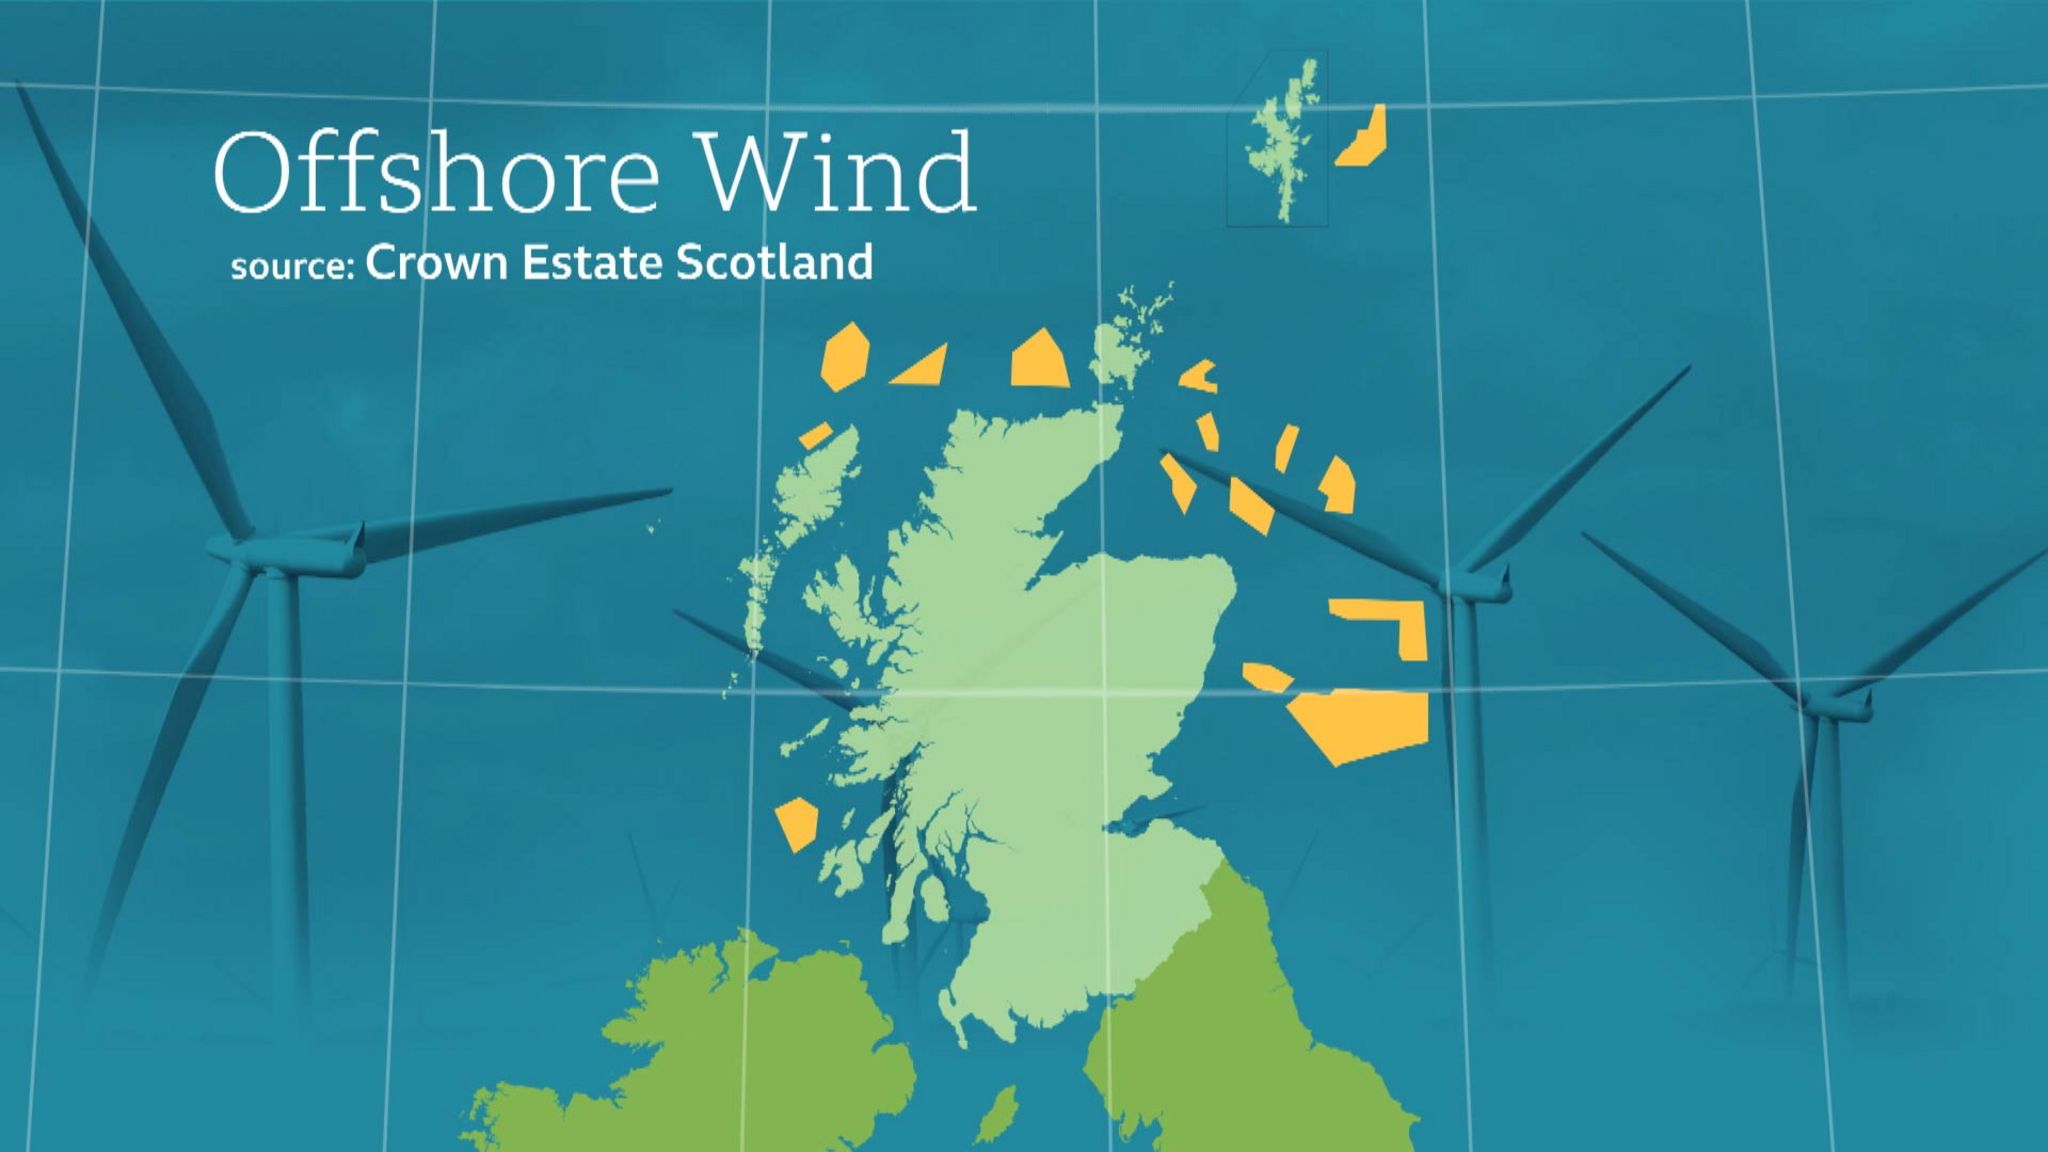 Many seabed areas off the Scottish coast could be developed for offshore wind